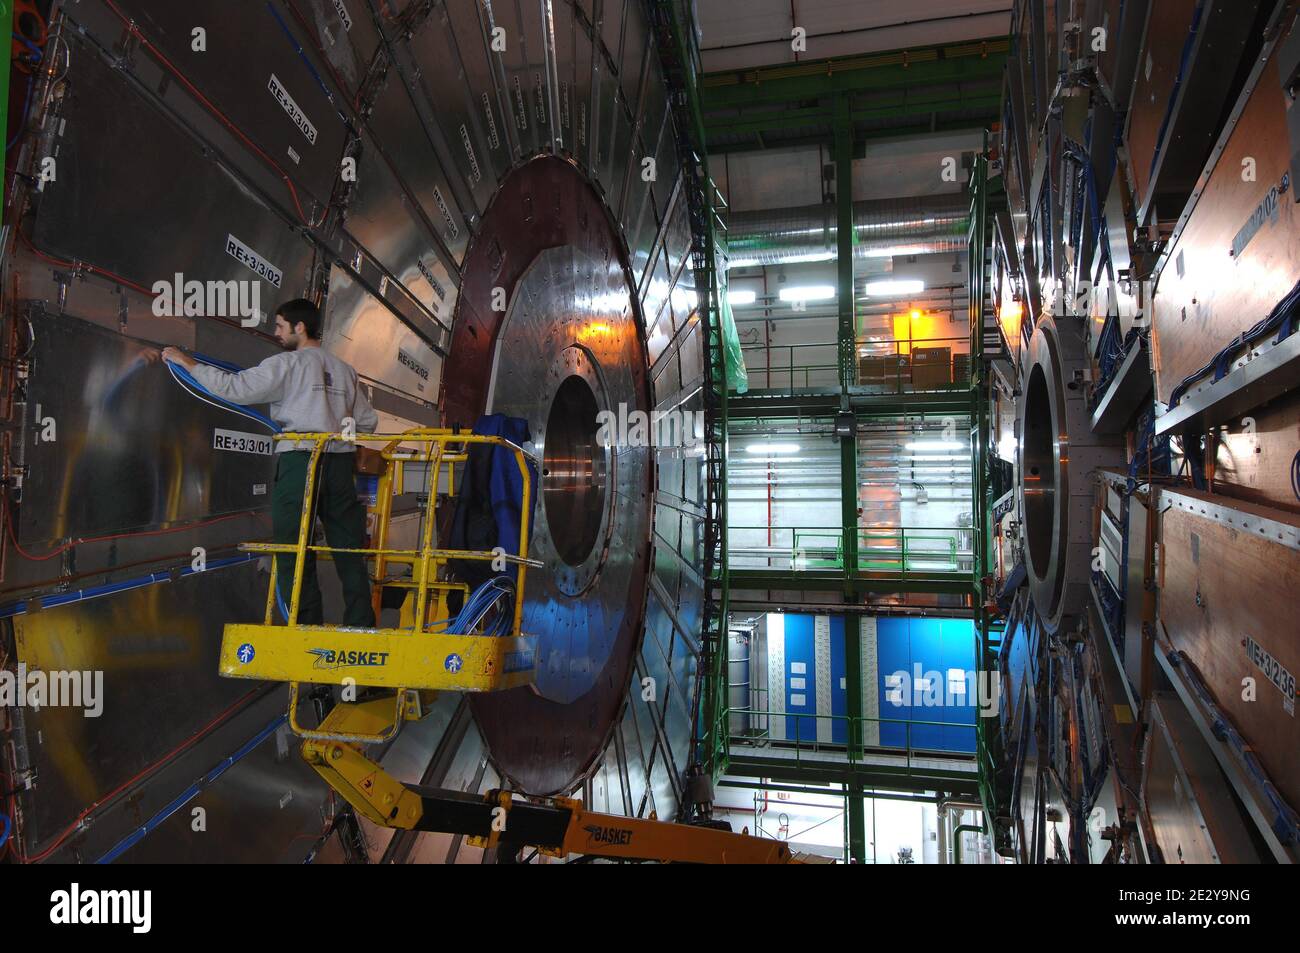 Manufacture of the Large Hadron Collider (LHC) of the European Organization  for Nuclear Research CERN (Centre Europeen de Recherche Nucleaire) in  Geneva, Switzerland on January 25, 2007. The Large Hadron Collider (LHC)